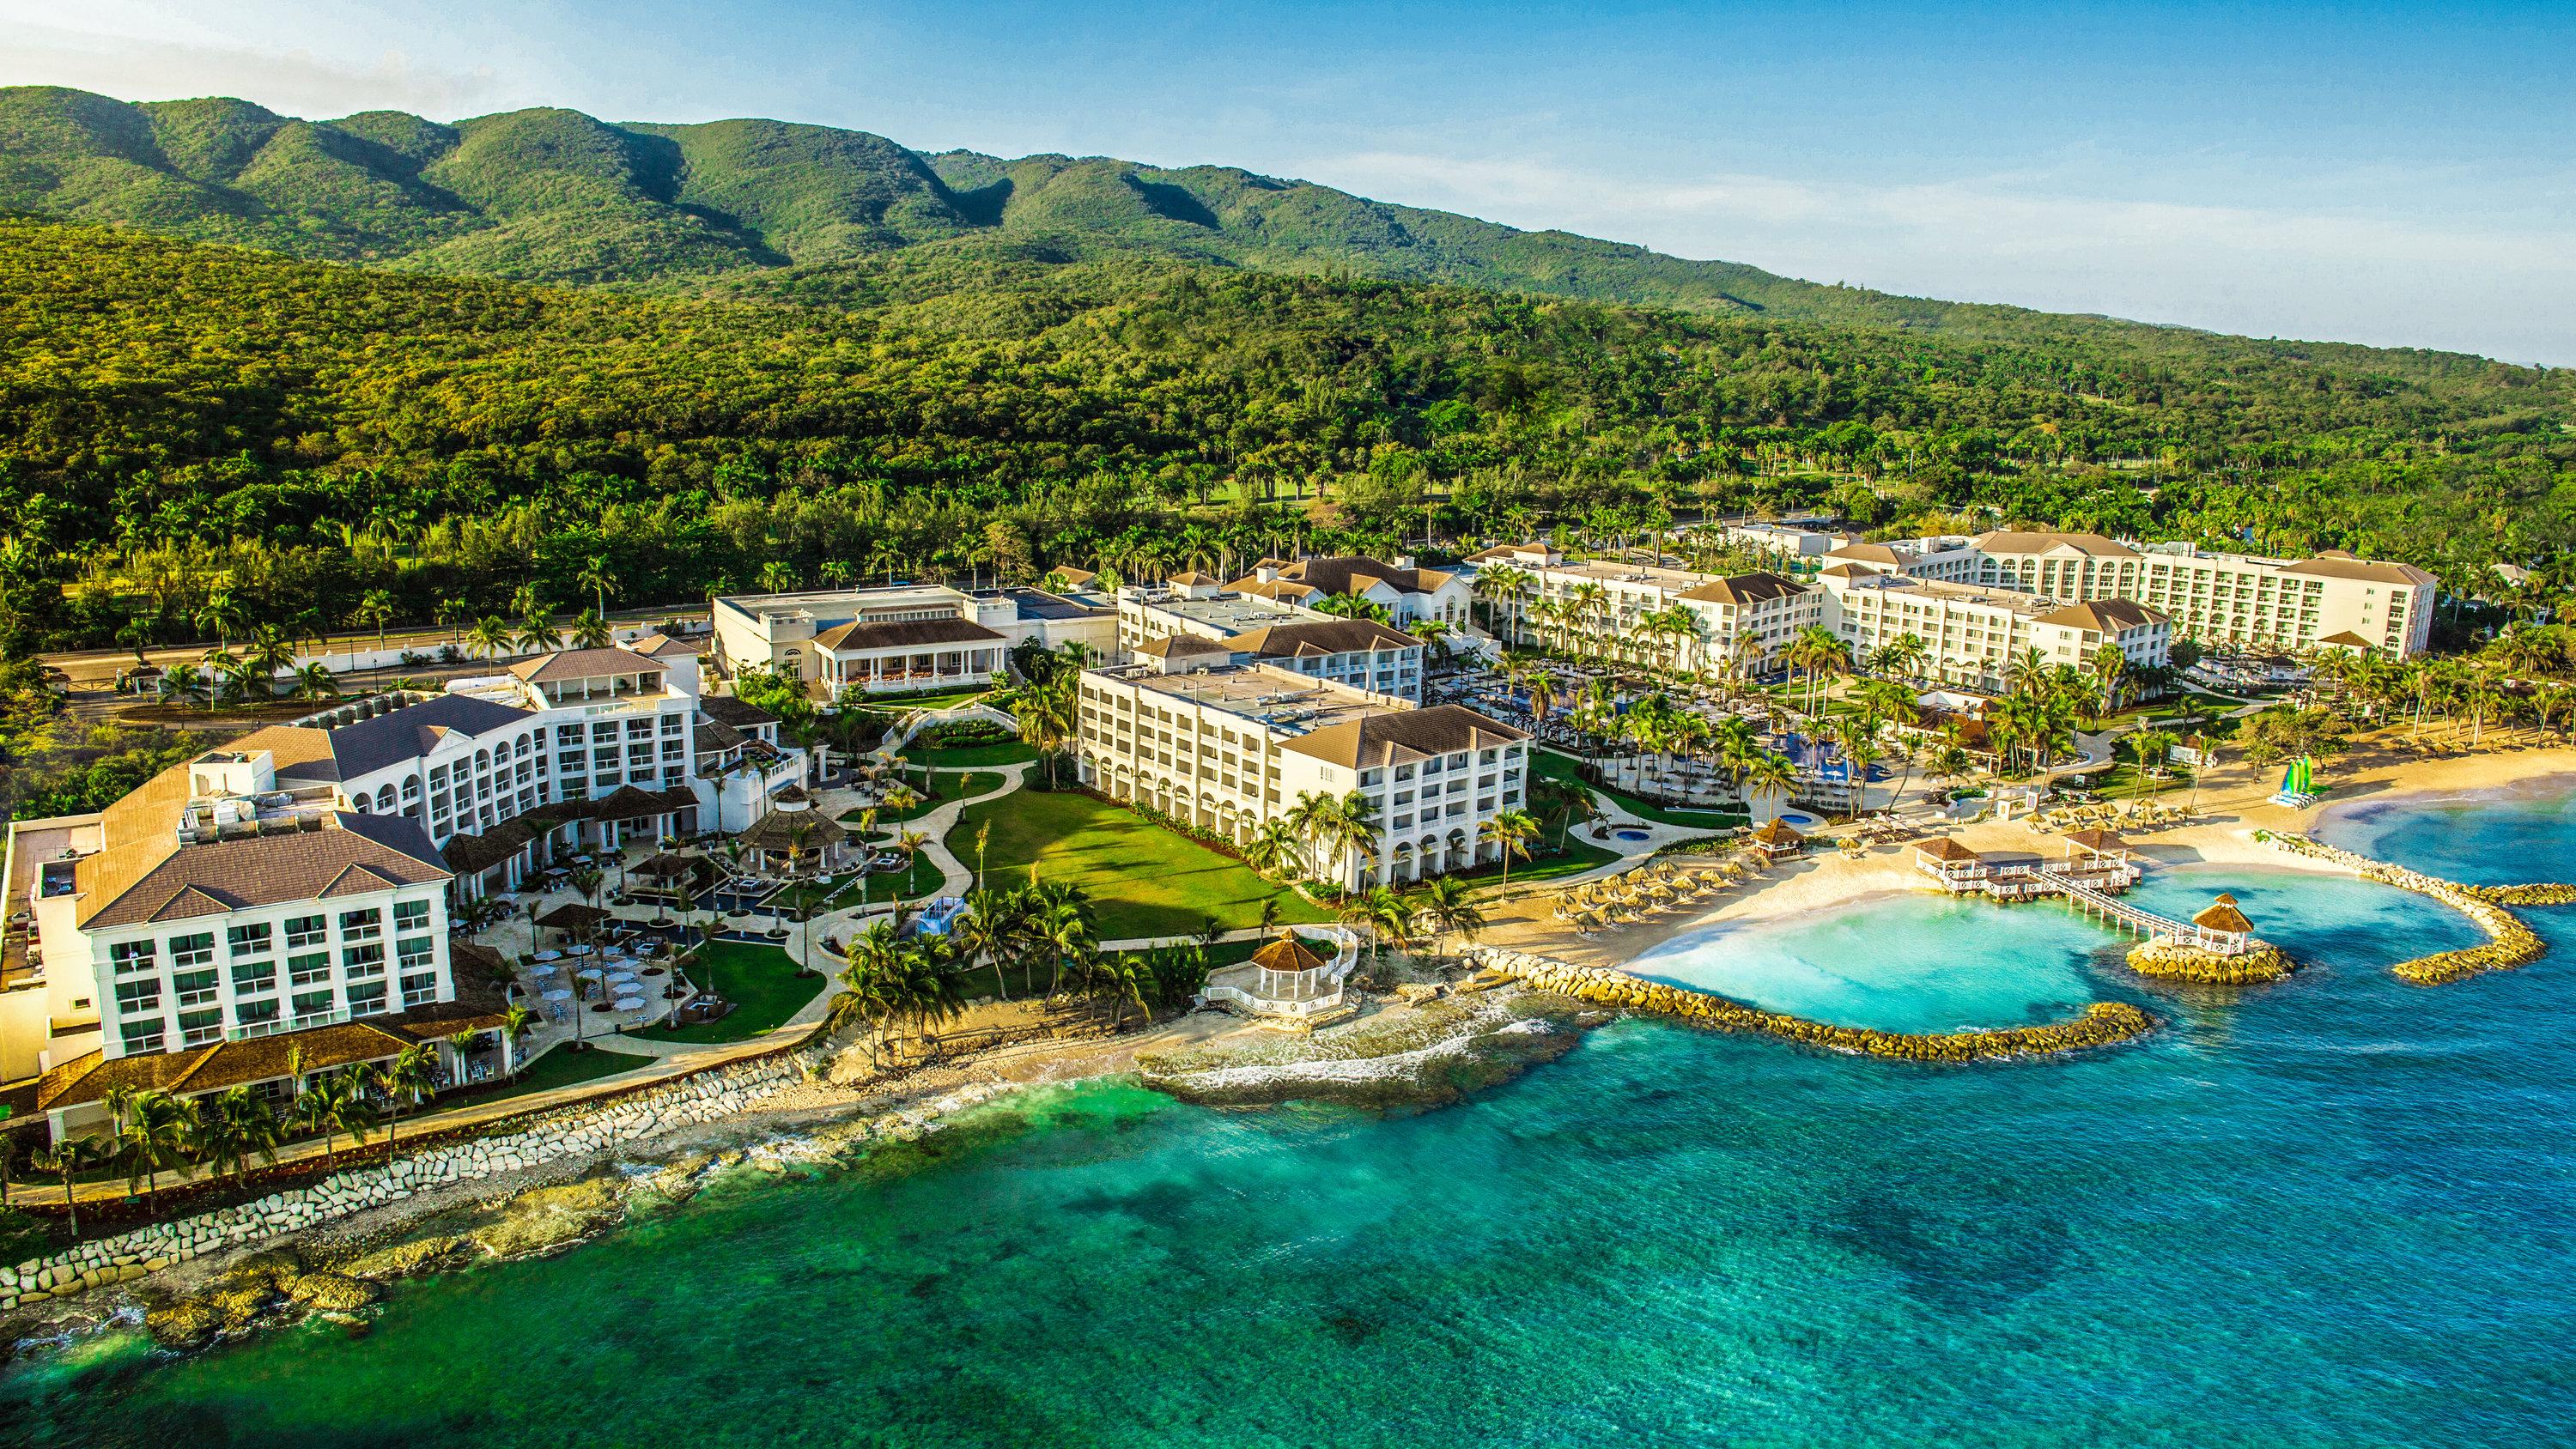 16 Best Hotels in Montego Bay. Hotels from C$ 35/night - KAYAK